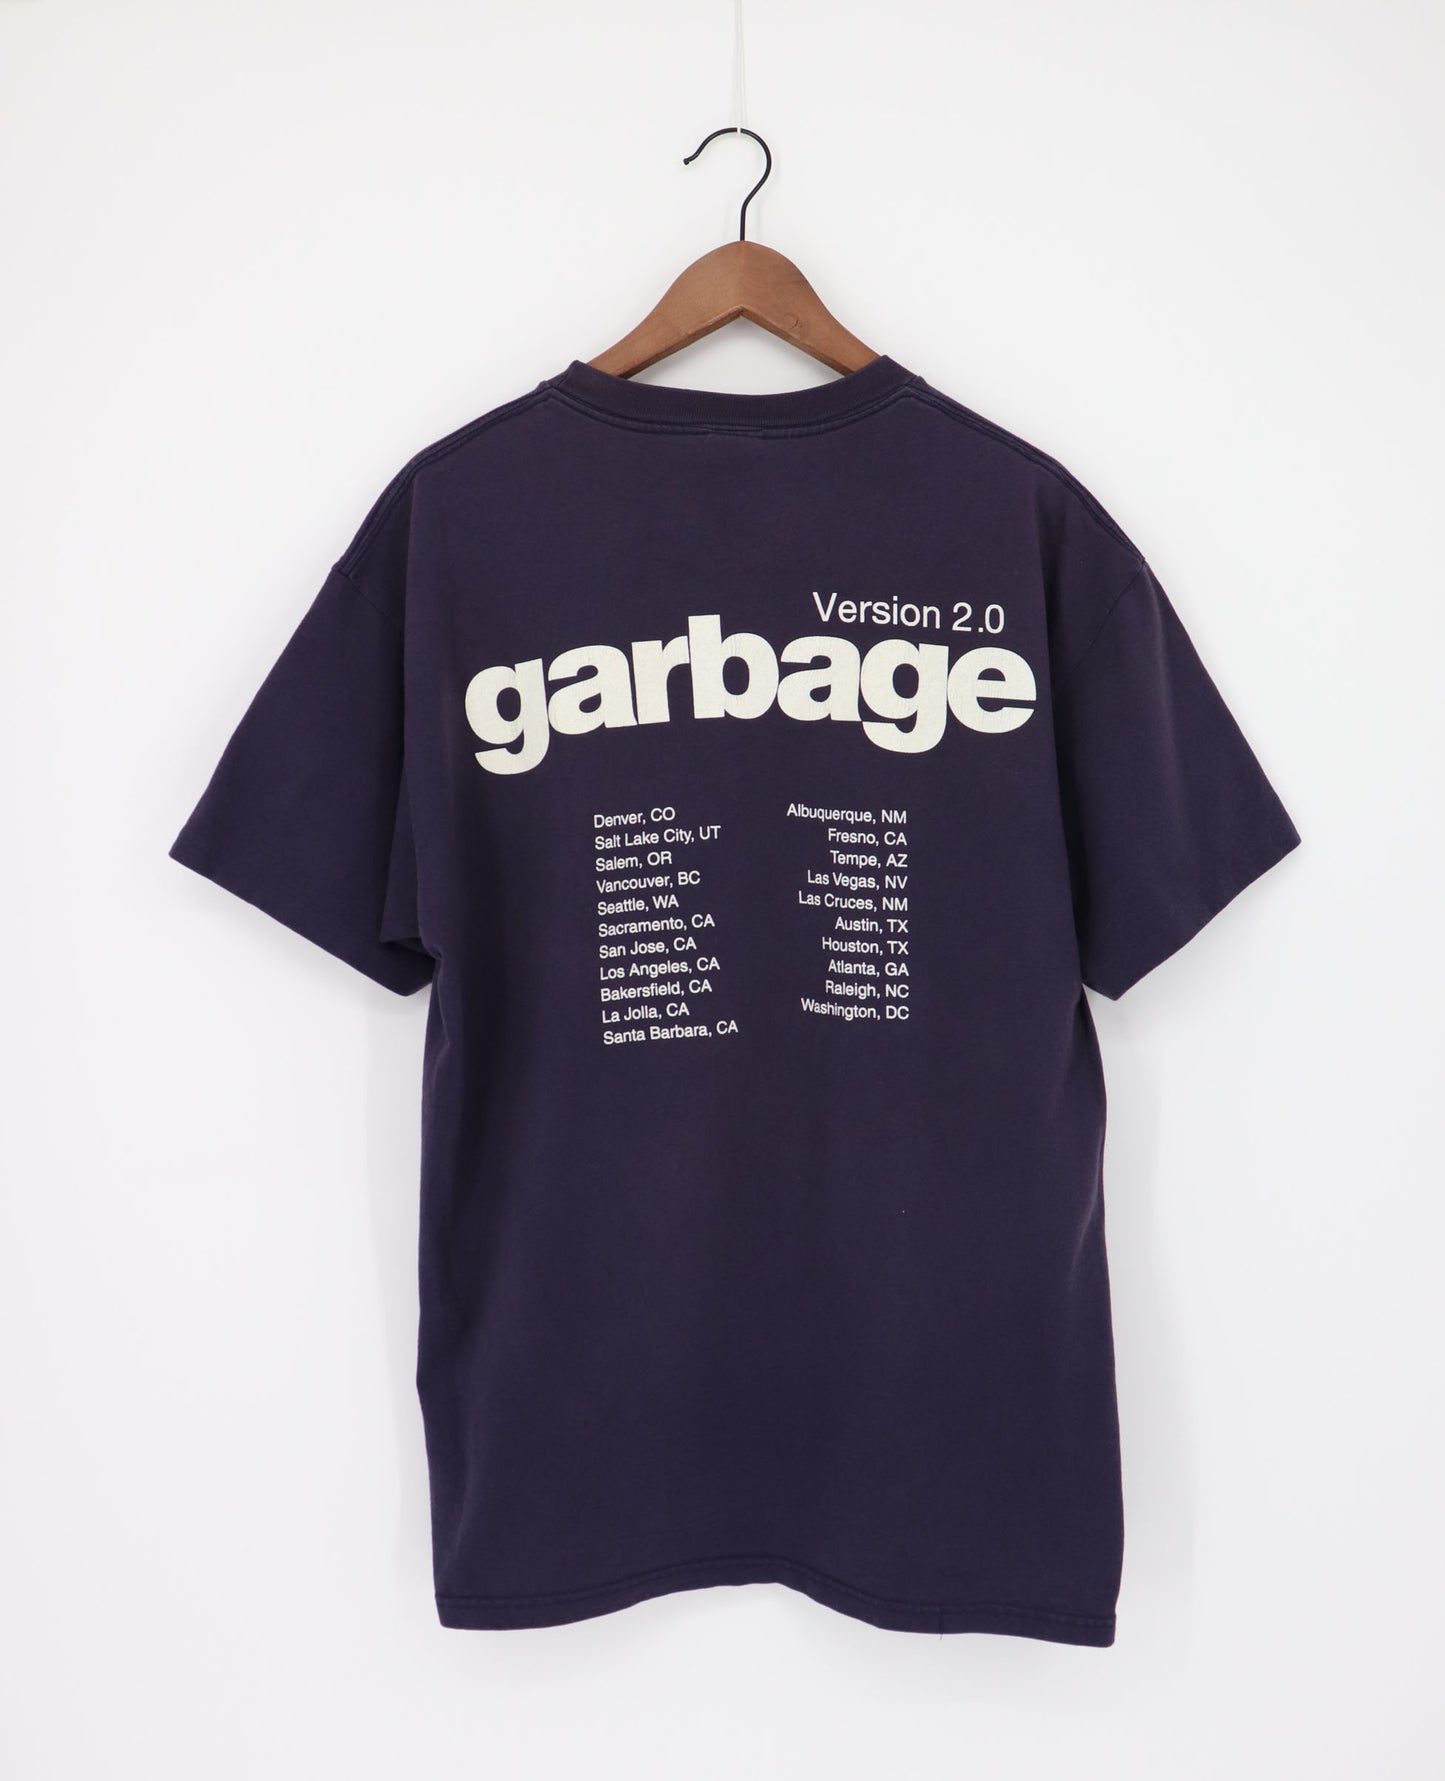 GARBAGE VERSION 2.0 BAND TEE (XL) Single Stitched Anvil